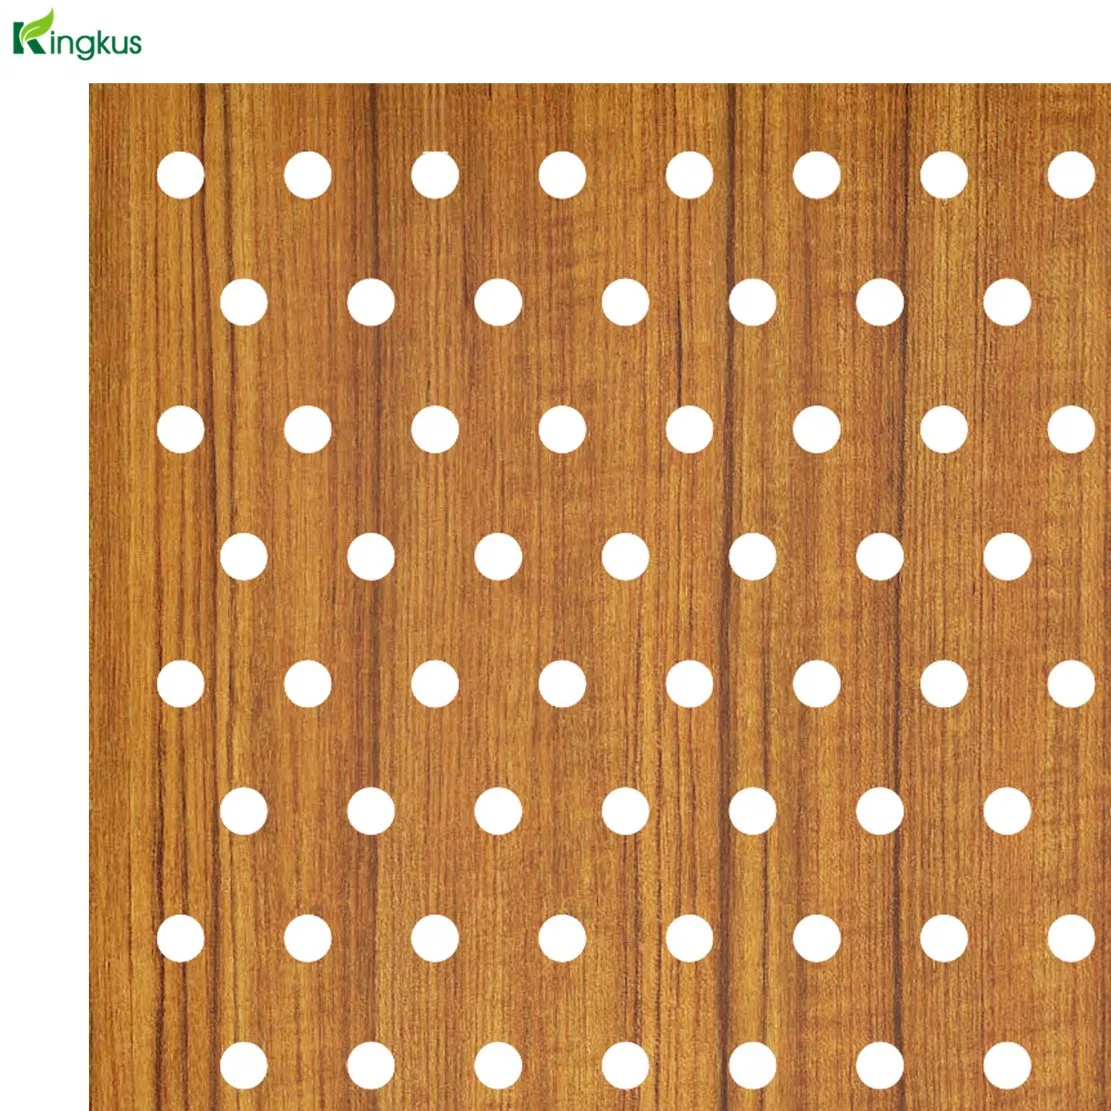 Pl616 MDF Wooden Perforated Acoustic Board for Auditorium